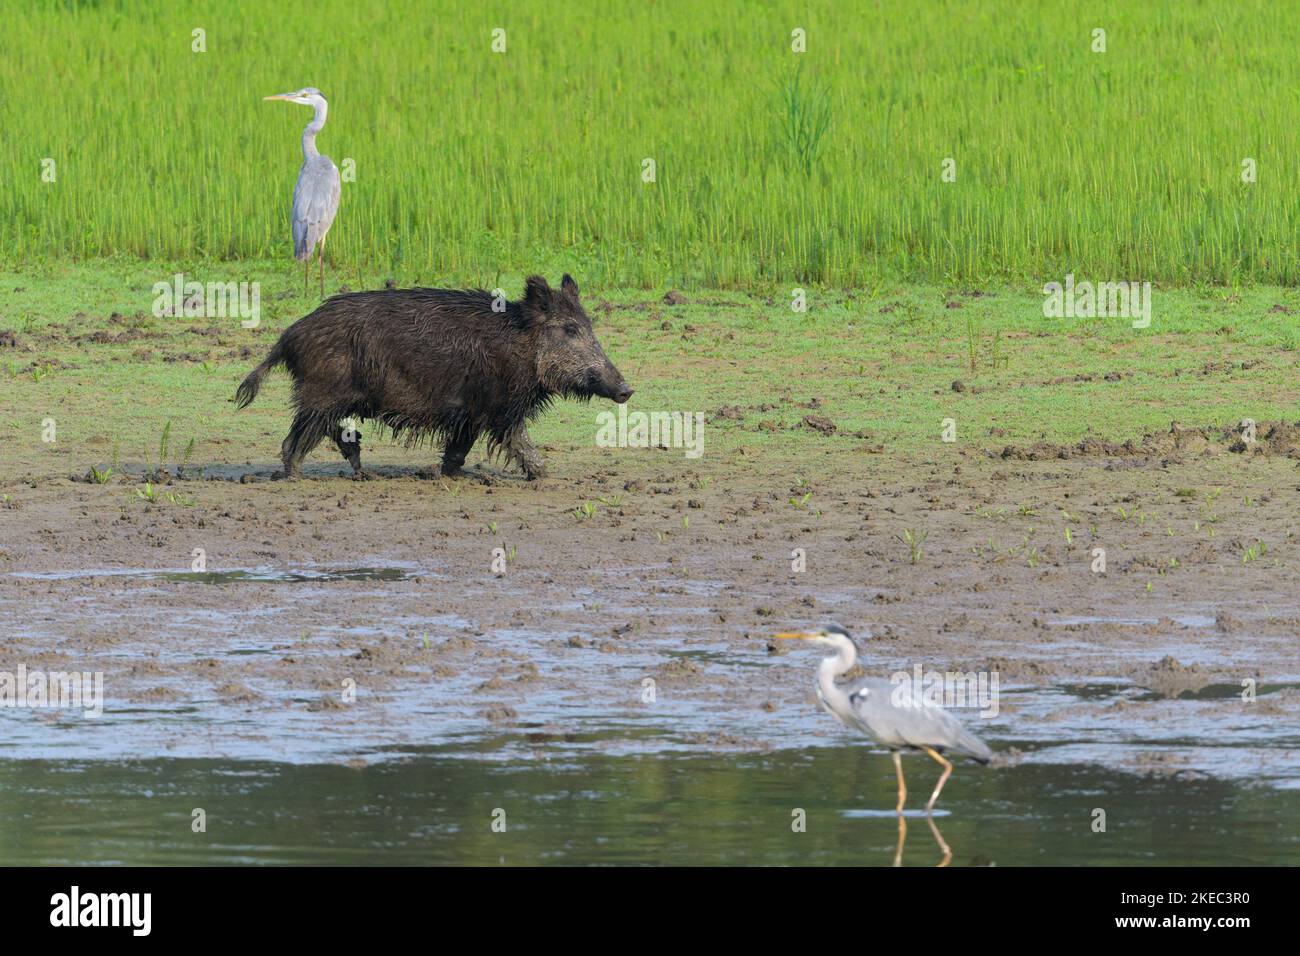 Wild boar (Sus scrofa) running on the bank of a pond, in the background and foreground are gray herons, May, summer, Hesse, Germany, Europe Stock Photo